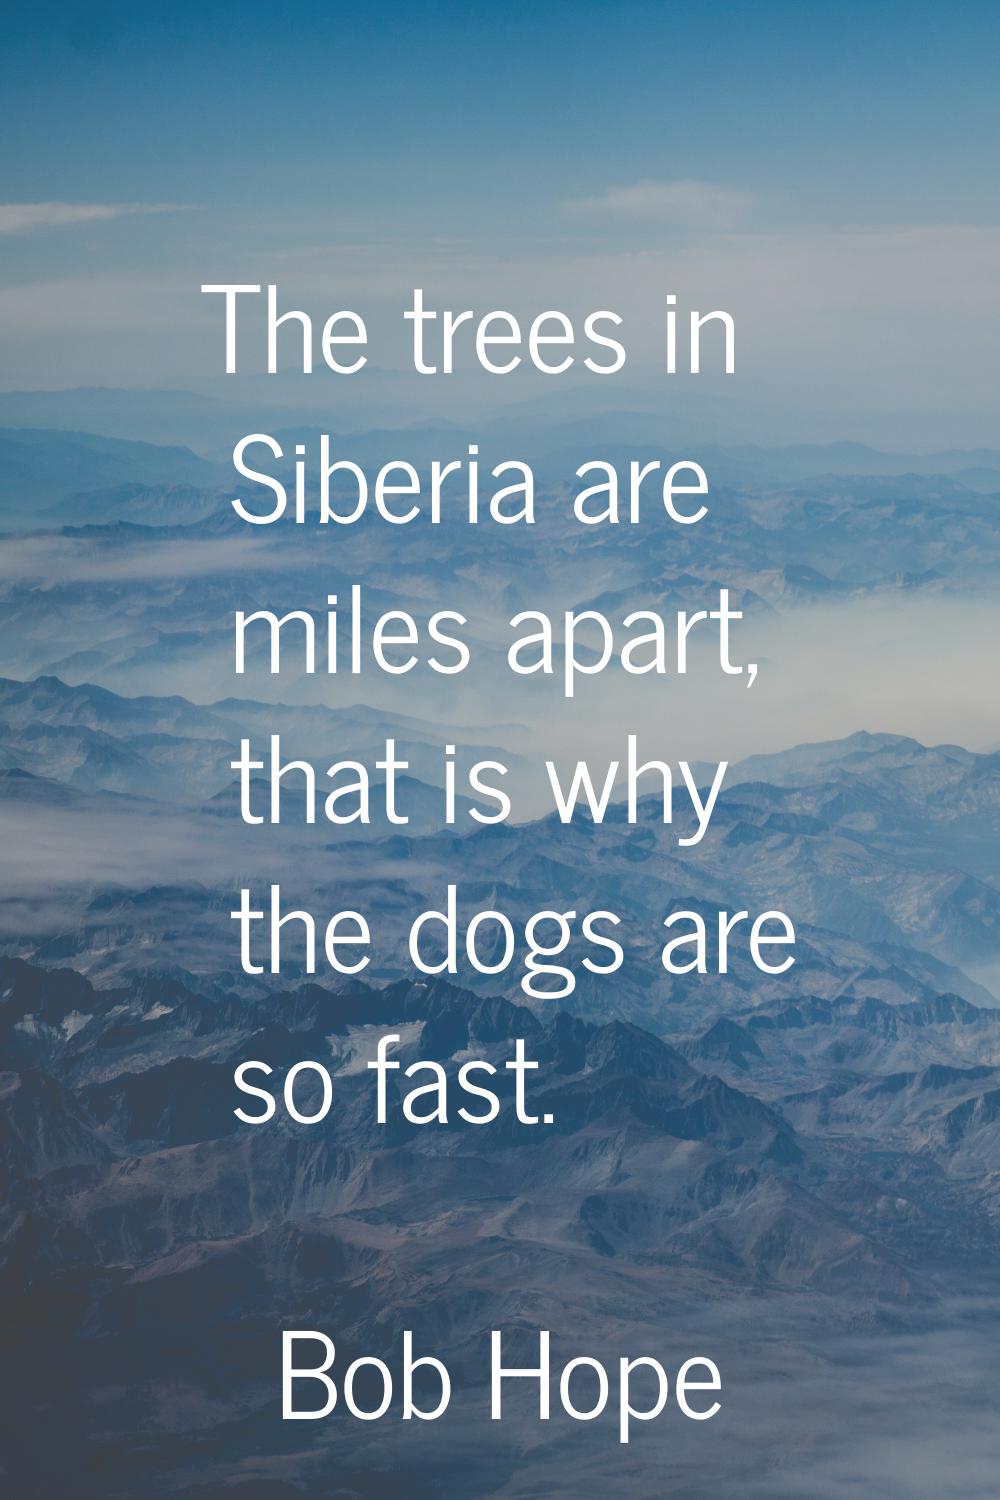 The trees in Siberia are miles apart, that is why the dogs are so fast.